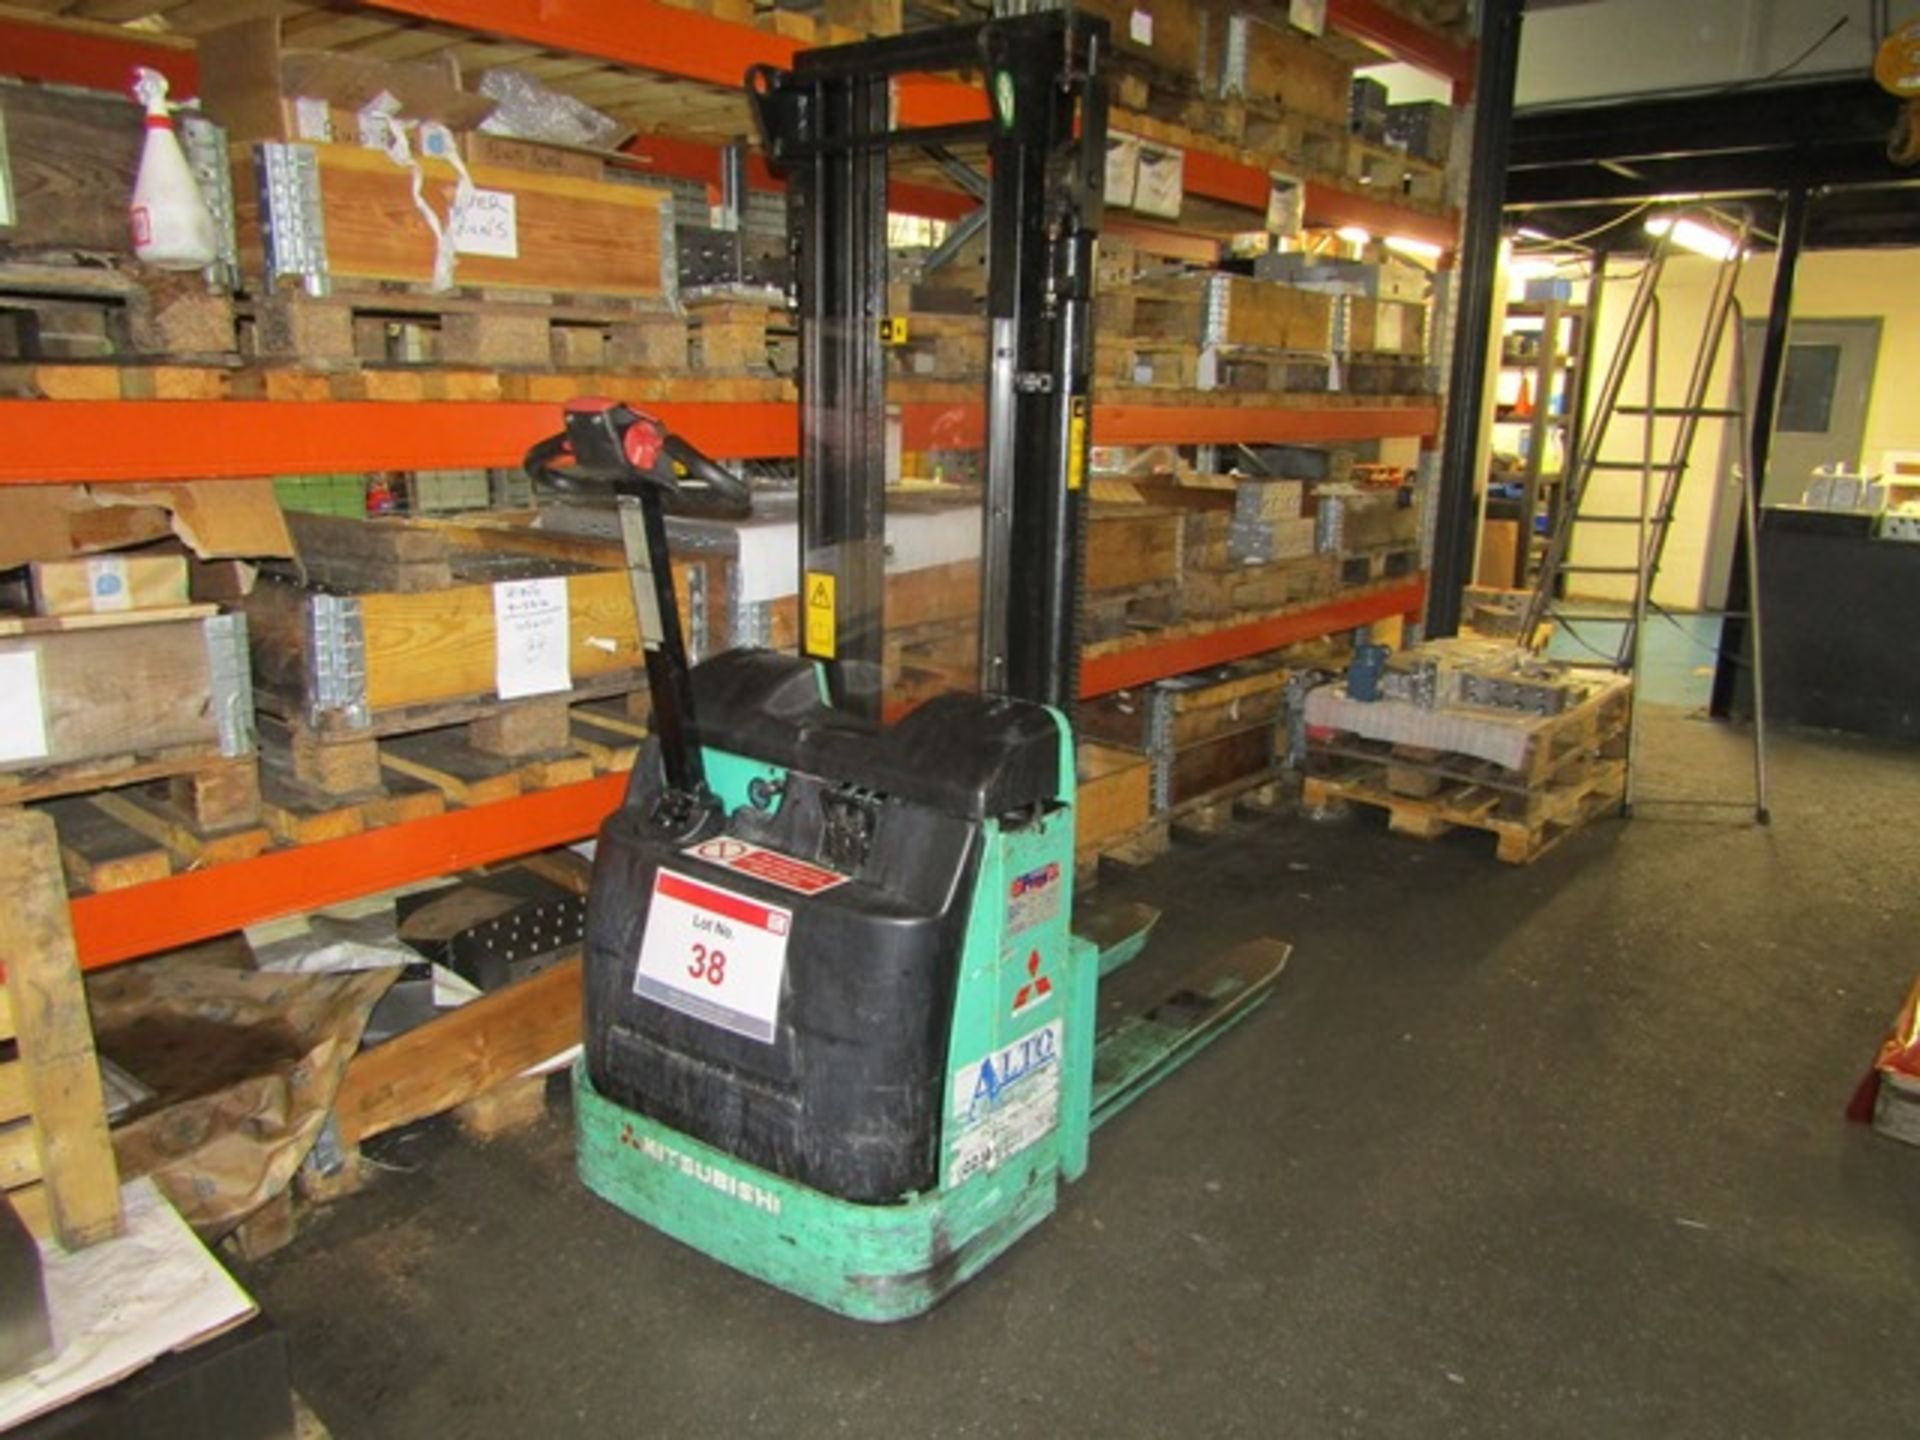 Misubishi SBP12K pedestrian battery operated, pallet truck/forklift truck, serial no: SP1200513, max